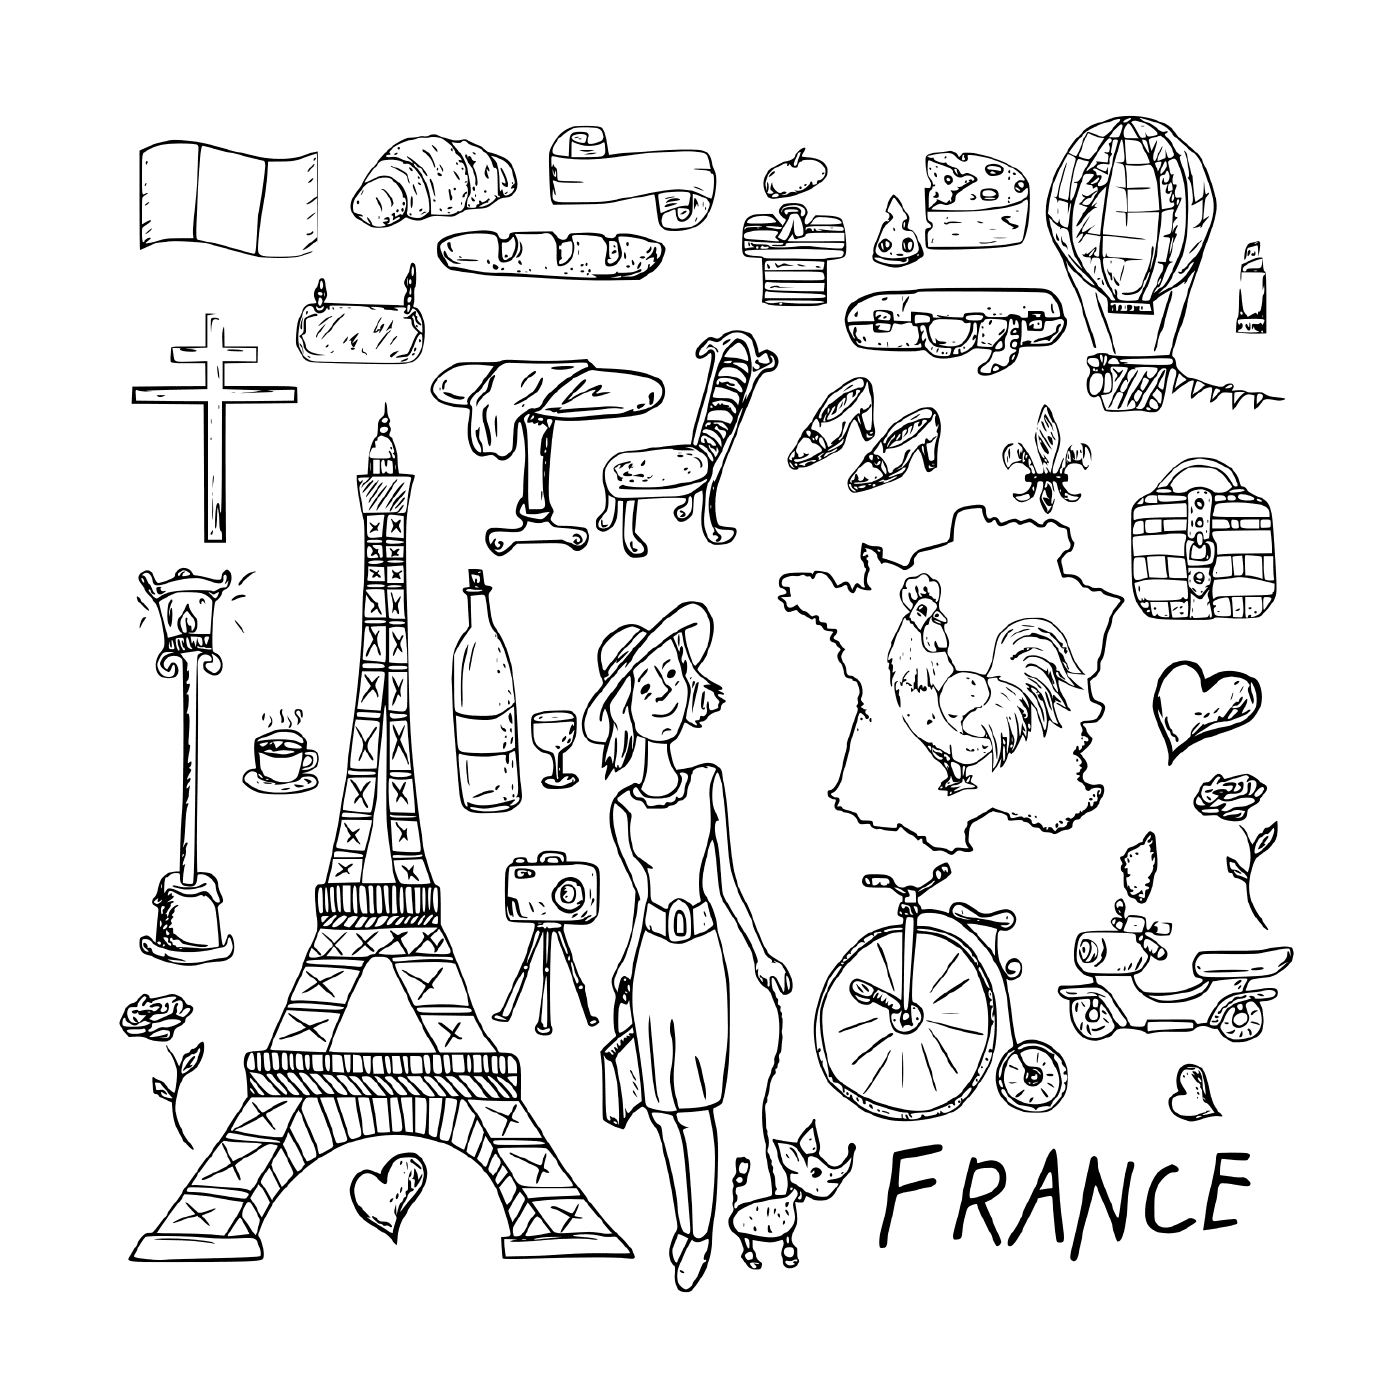  Travelling to France, ideal destination 